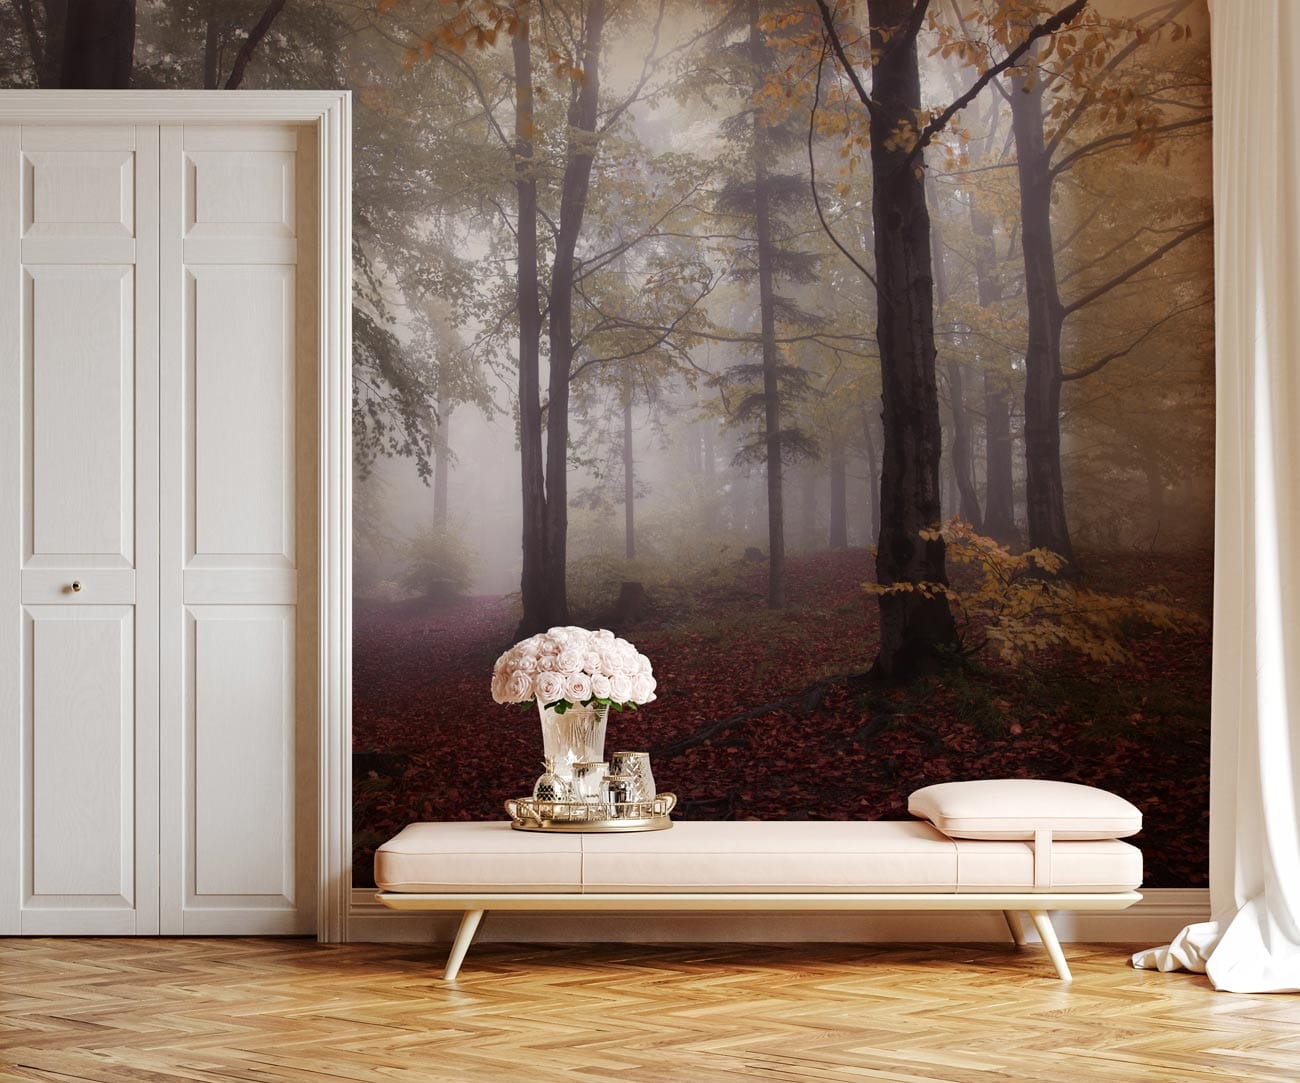 wallpaper in the living room depicting a natural woodland scene in the dark